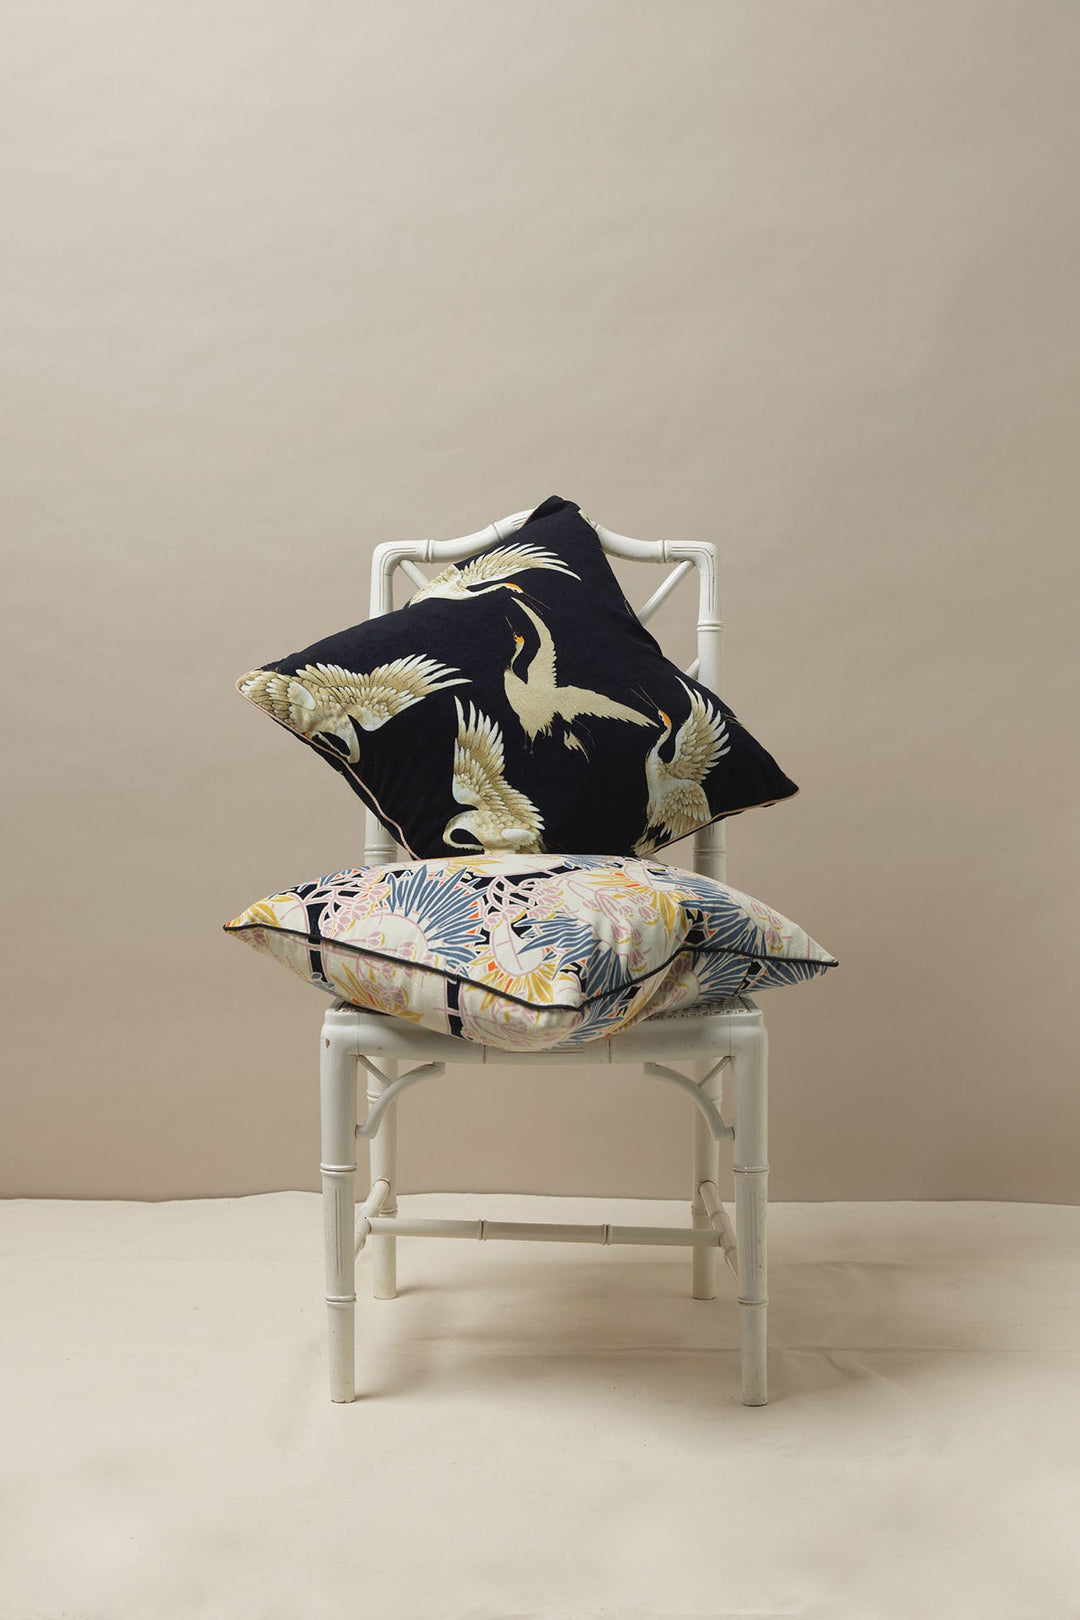 One Hundred Stars - Stork Crane Black Square Velvet Cushion - is perfect for adding a new luxurious print to any room. Picture here with our Deco Daisy cushions, they create the perfect combination of prints. 